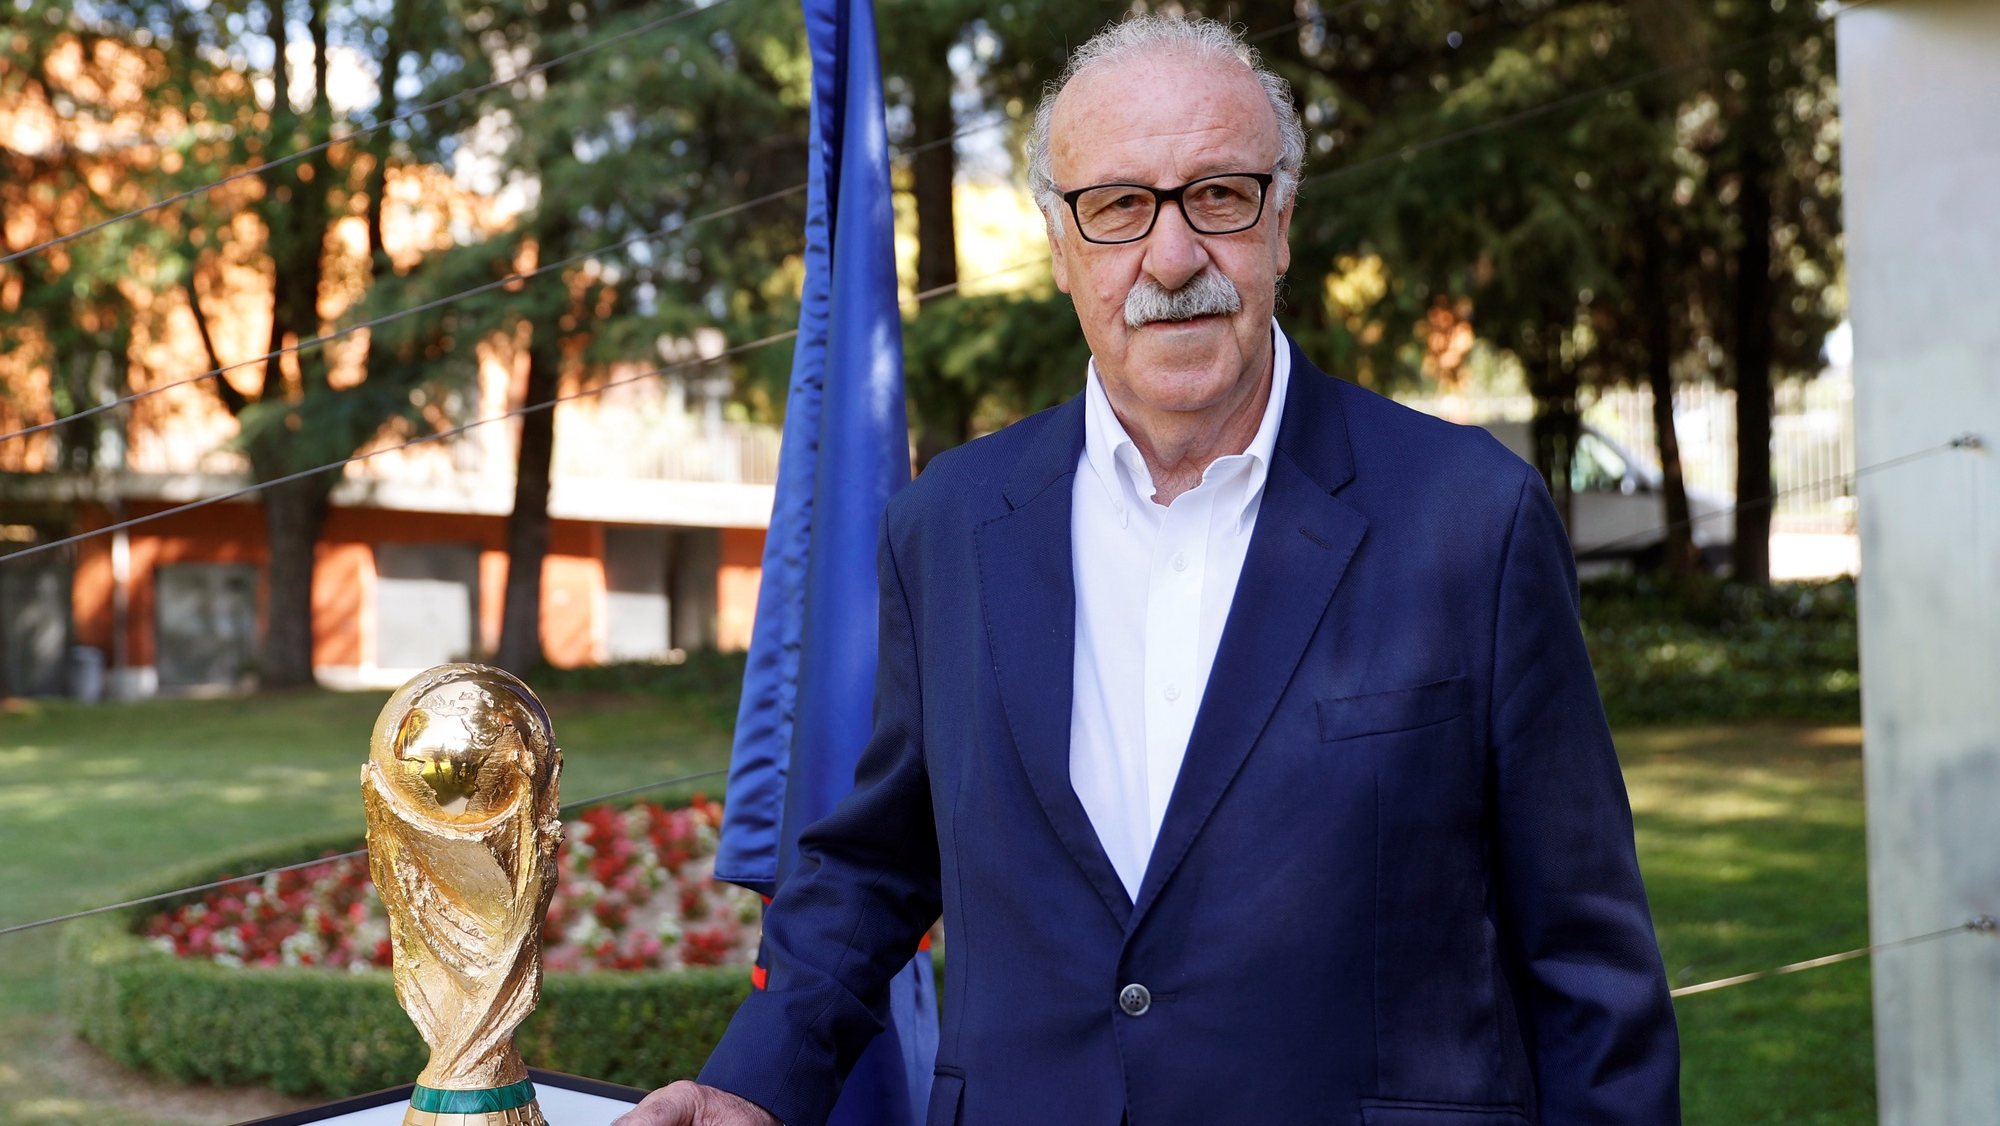 epa08538337 Former Spanish national soccer team head coach Vicente del Bosque poses next to the FIFA World Cup trophy during an event to commemorate the 10th anniversary of Spain&#039;s victory at the 2010 FIFA World Cup in Madrid, Spain, 10 July 2020. Spain defeated the Netherlands 1-0 after extra time in the 2010 FIFA World Cup final at Soccer City Stadium in Johannesburg, South Africa on 11 July 2010.  EPA/MARISCAL